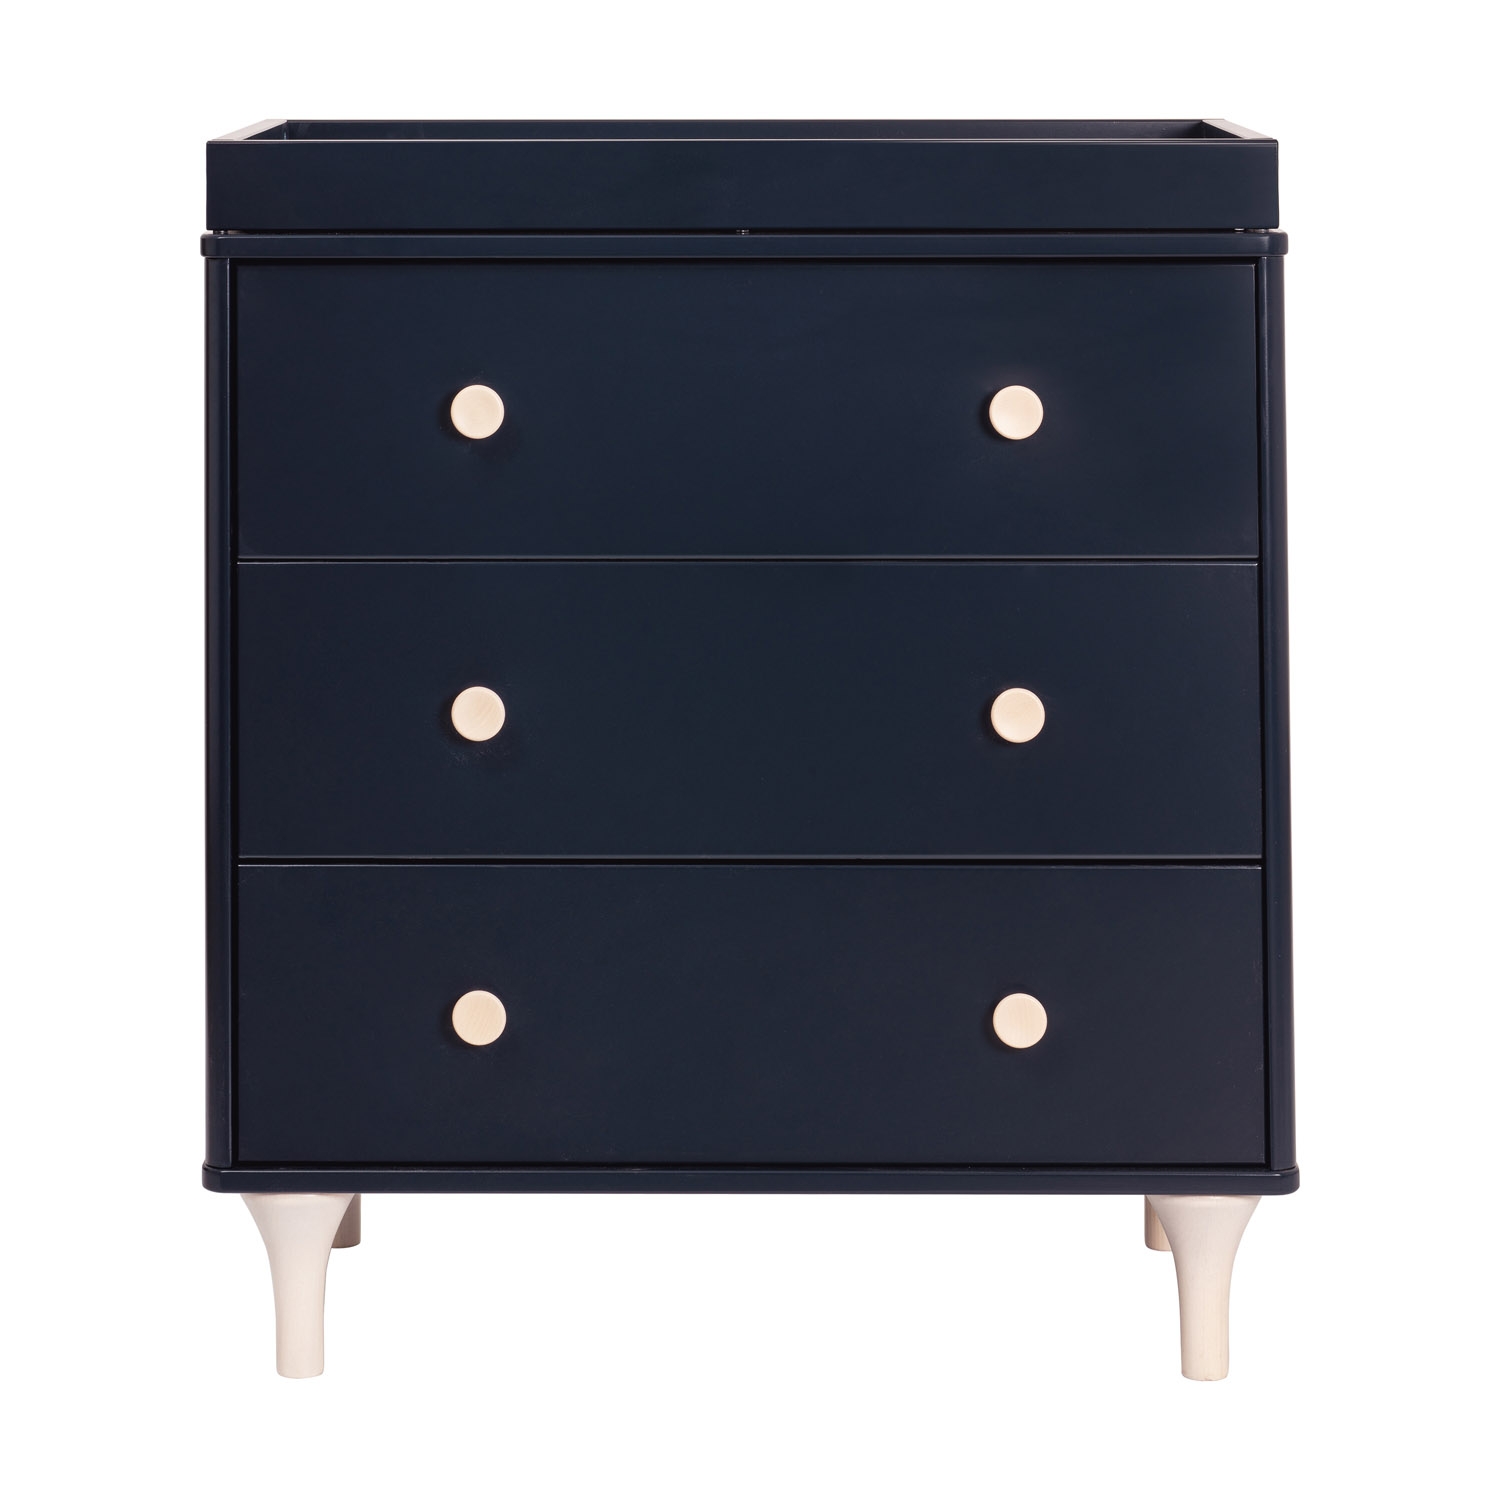 Babyletto Lolly Modern Classic Navy Blue Changing Station Dresser - Image 1